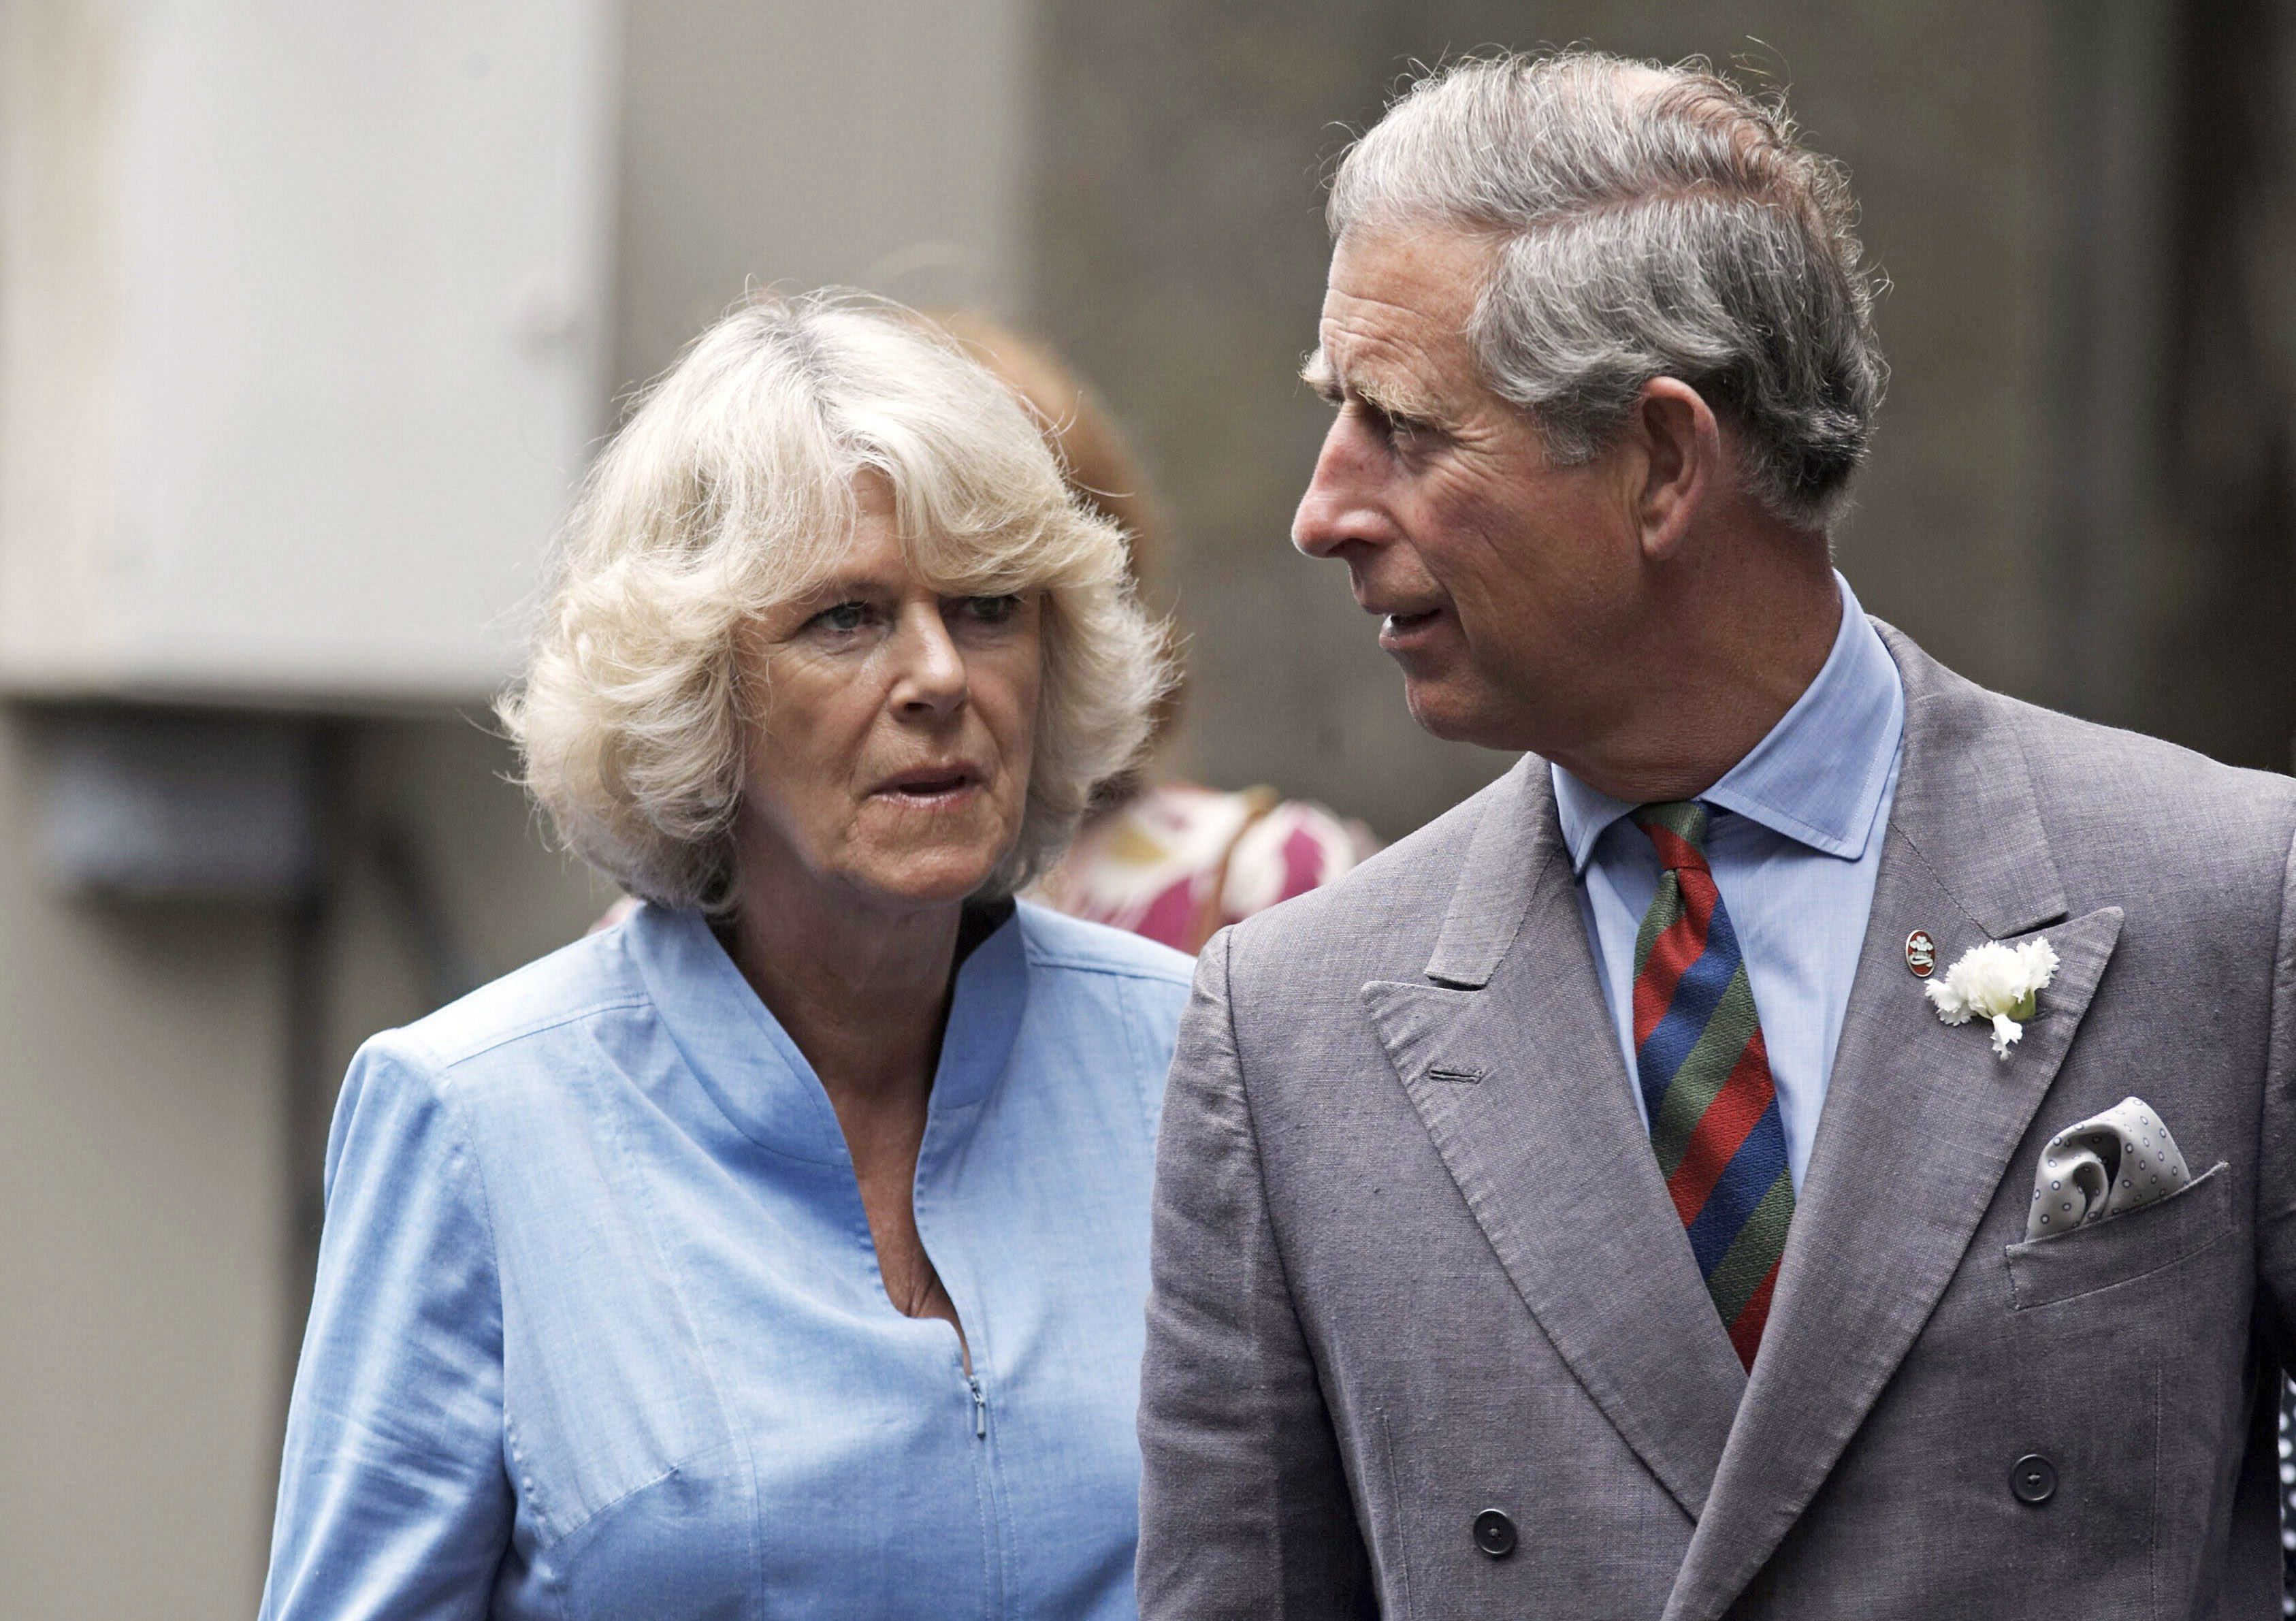 Prince Charles and Camilla Parker Bowles photographed during visit to Cardigan Castle